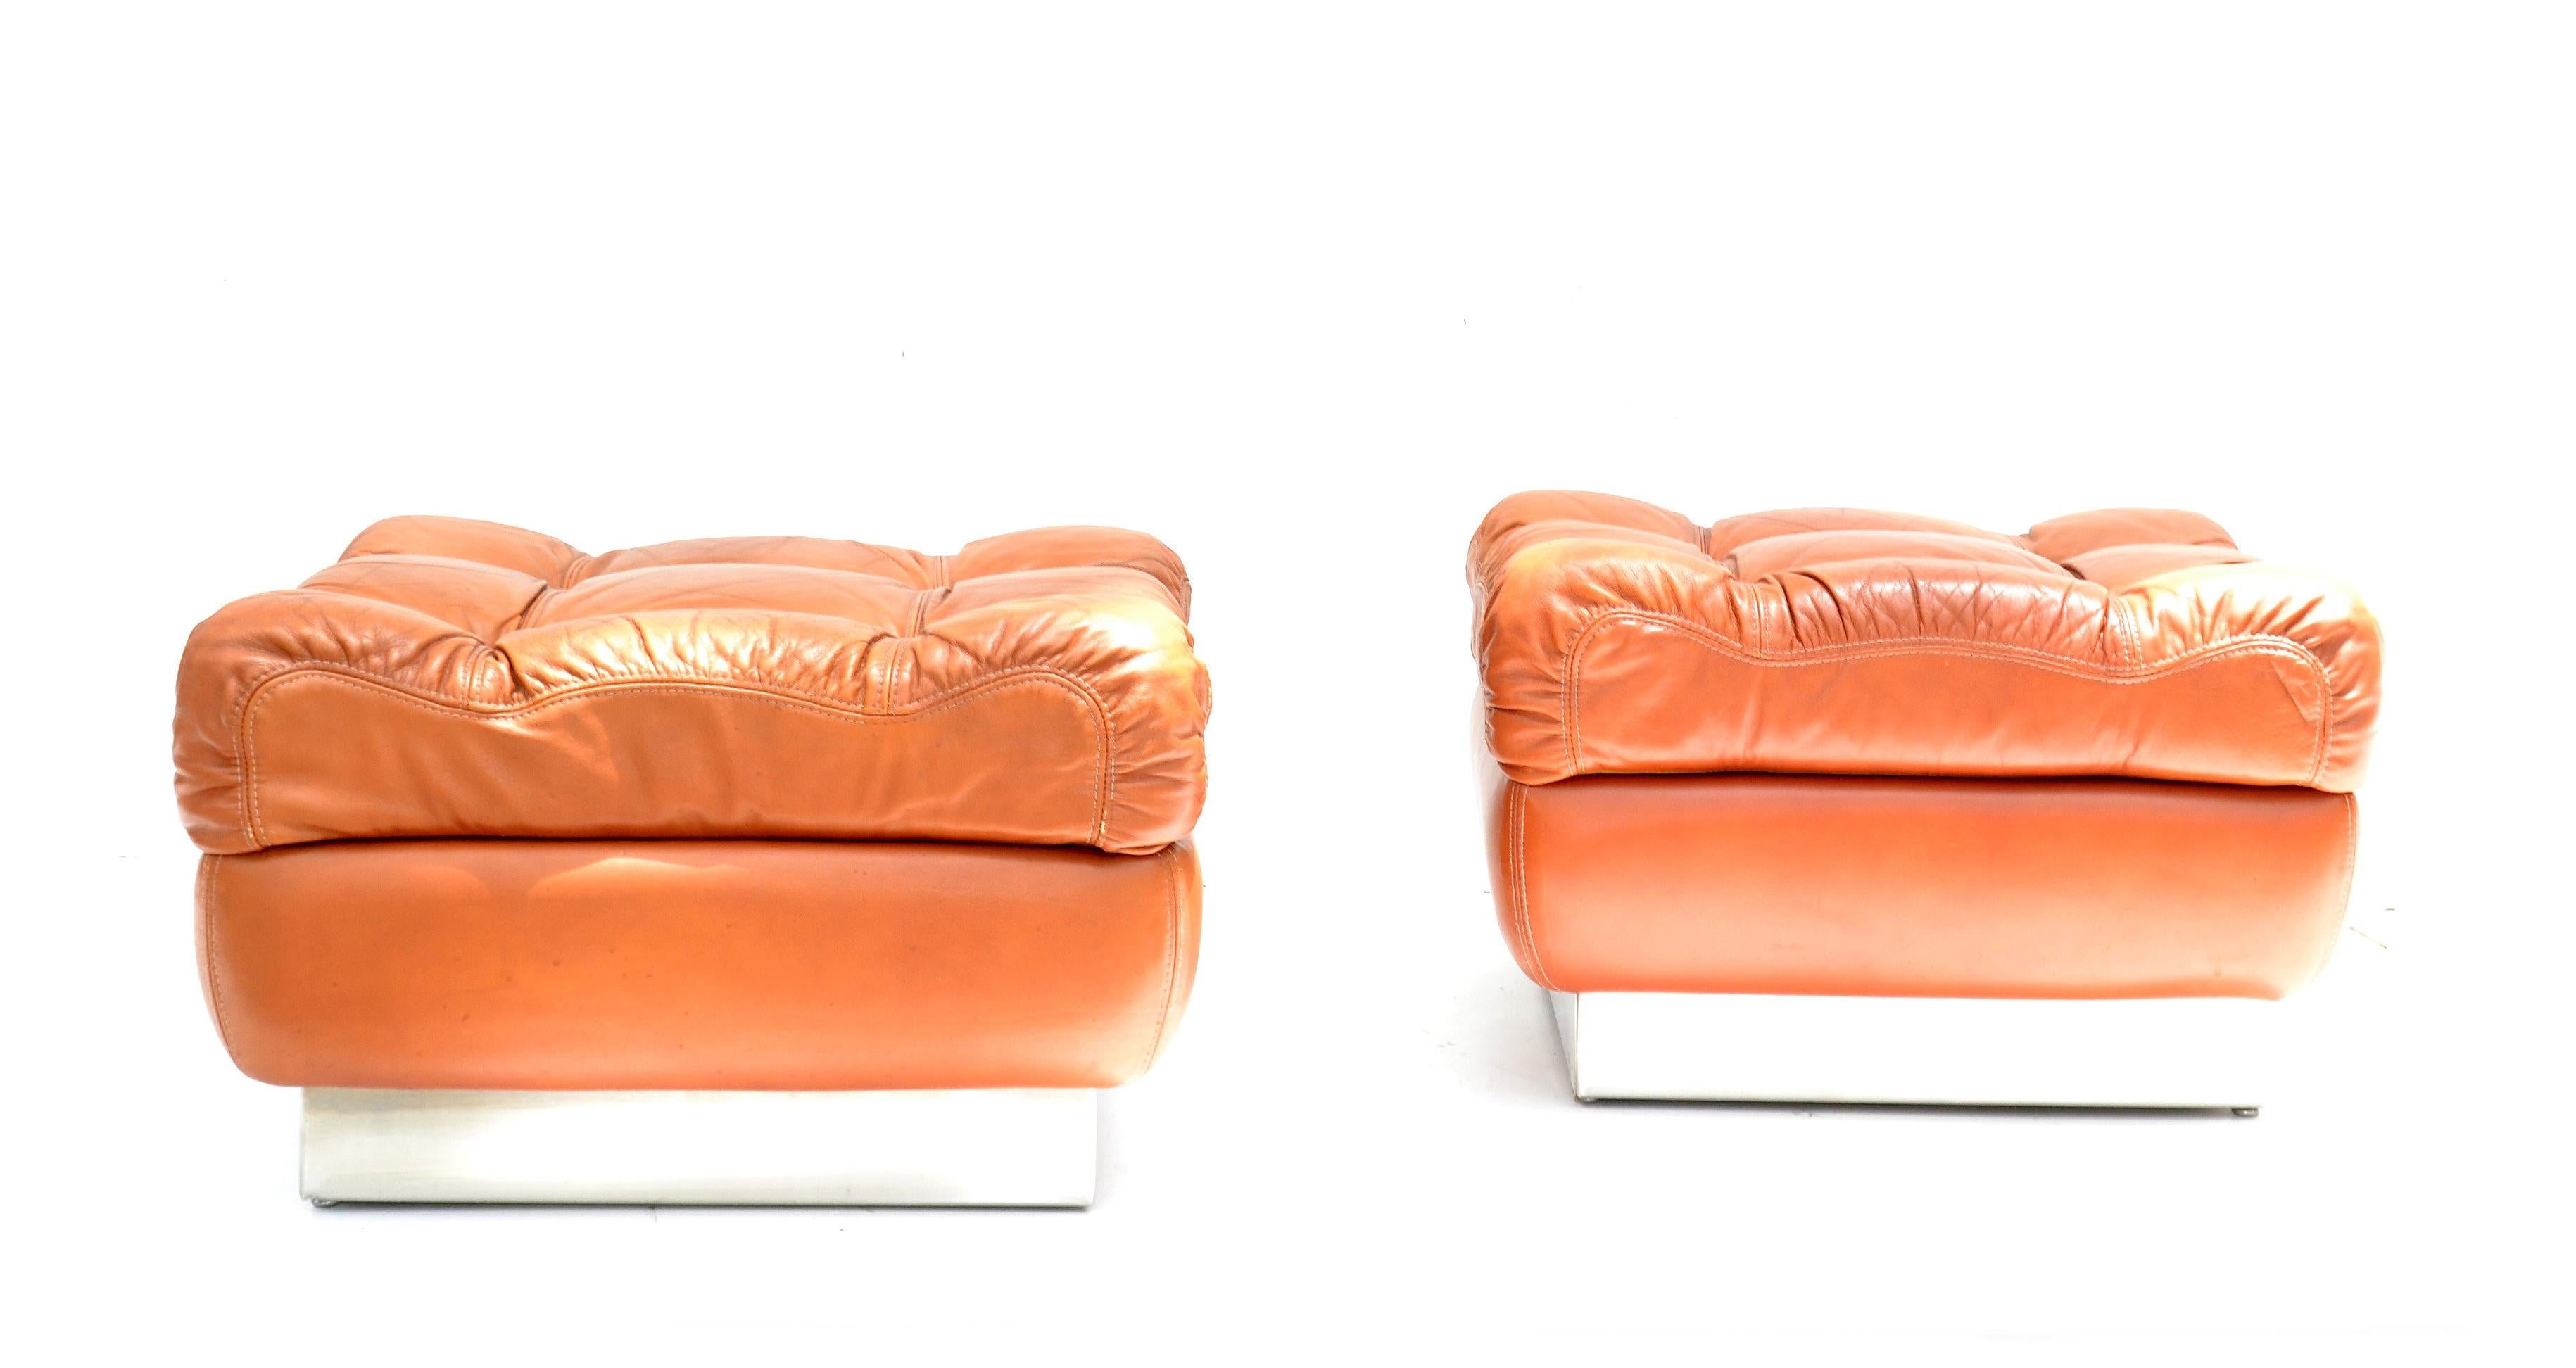 Jacques Charpentier Mid-Century Modern Tufted Leather Ottoman Stool Pair For Sale 4